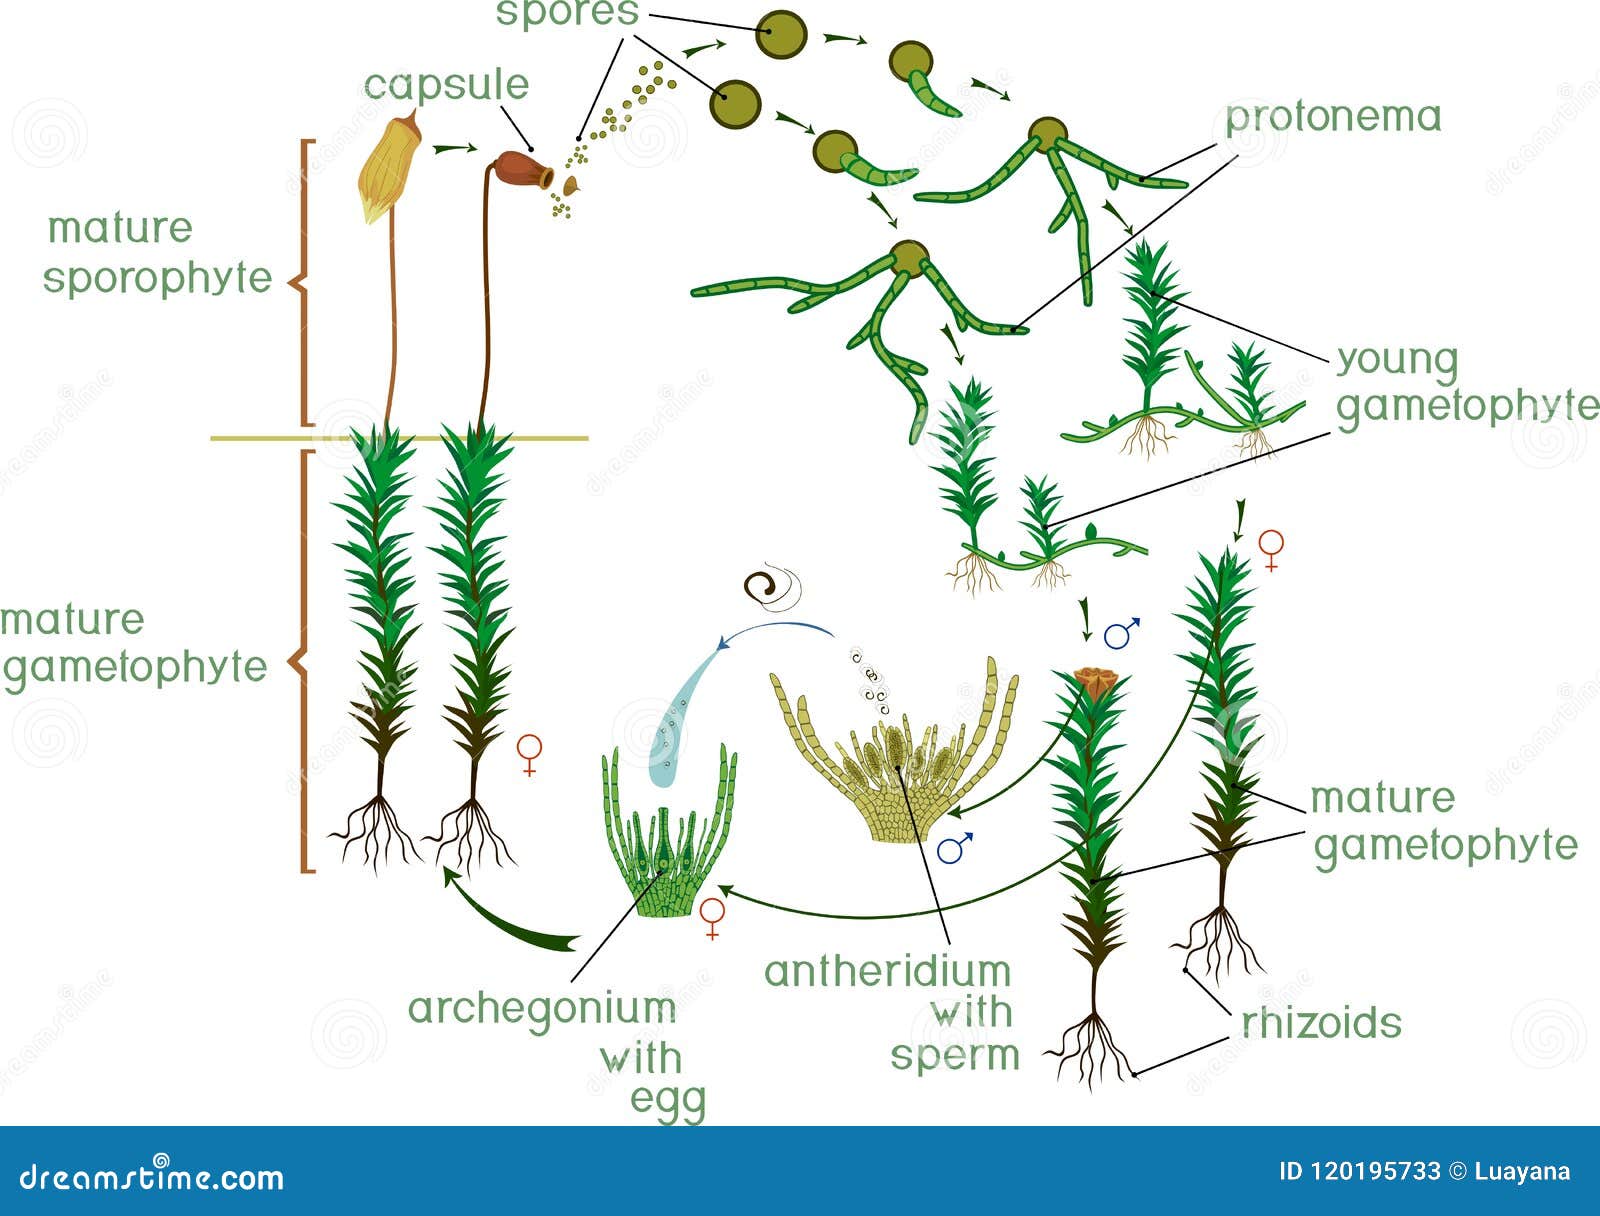 moss life cycle. diagram of life cycle of common haircap moss polytrichum commune